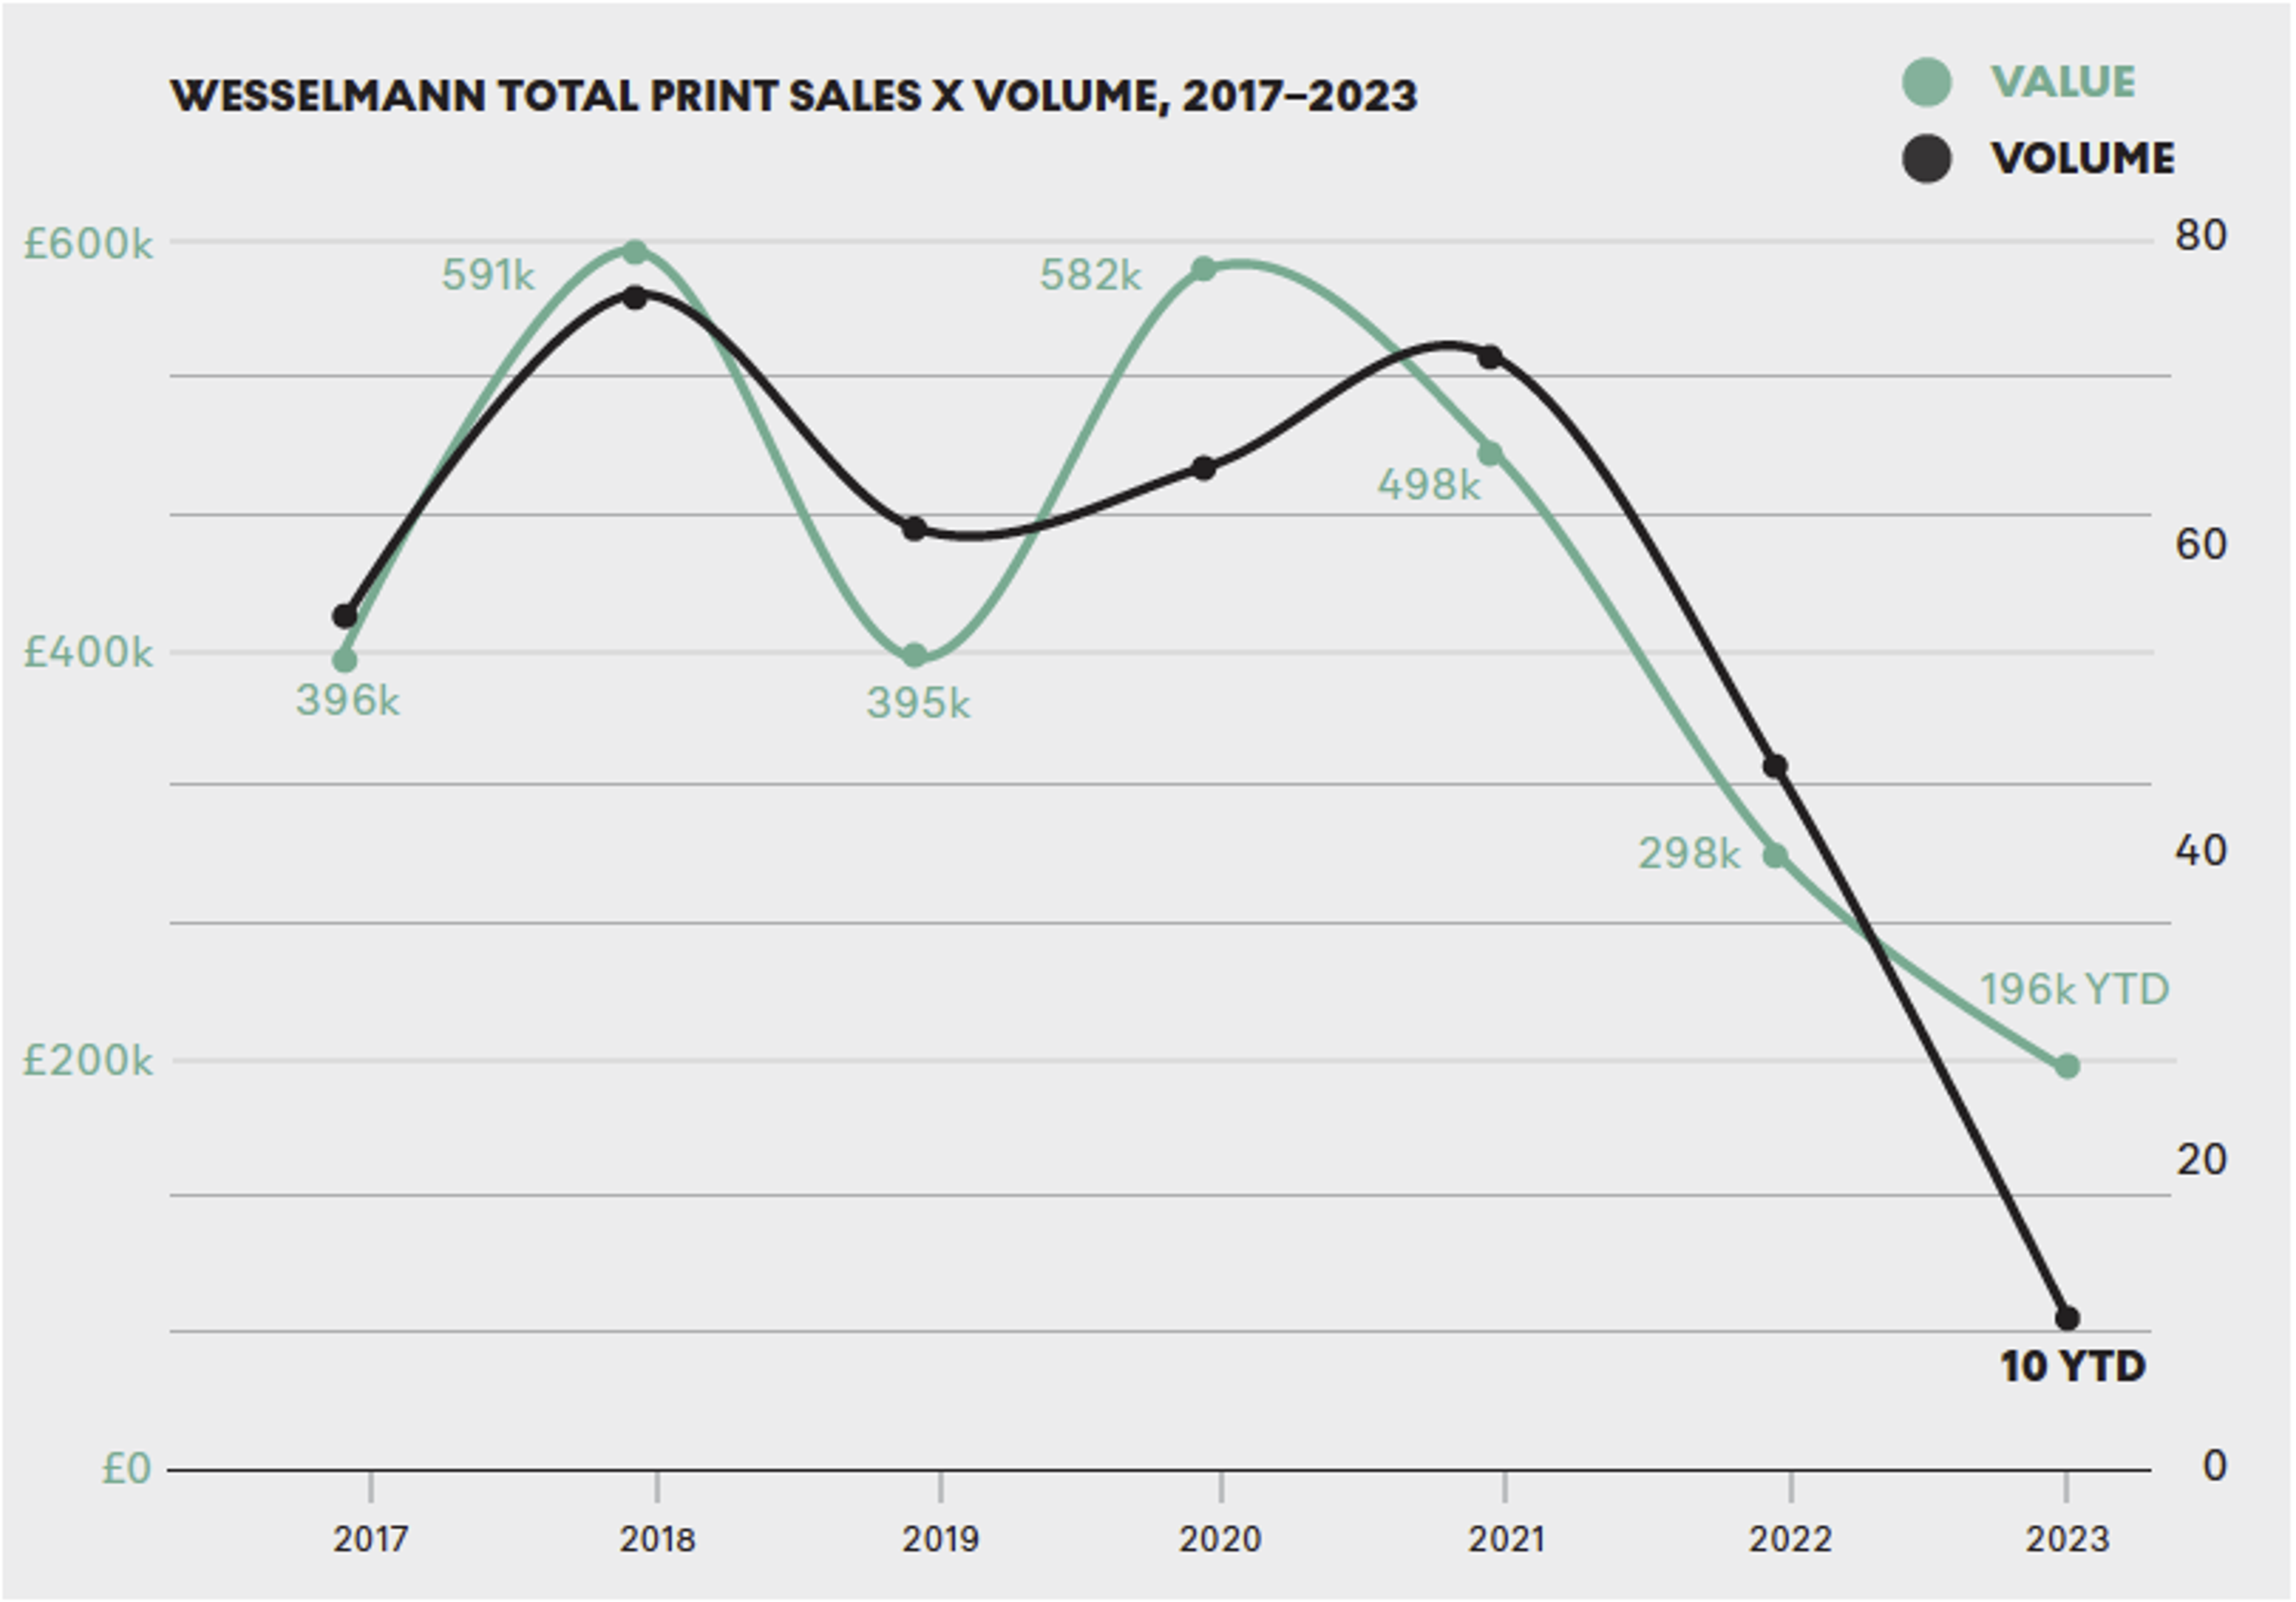 A double line graph depicting the print market performance of Tome Wesselmann over the past five years. The graph showcases annual total sales turnover and transaction volume from 2017 to 2023.